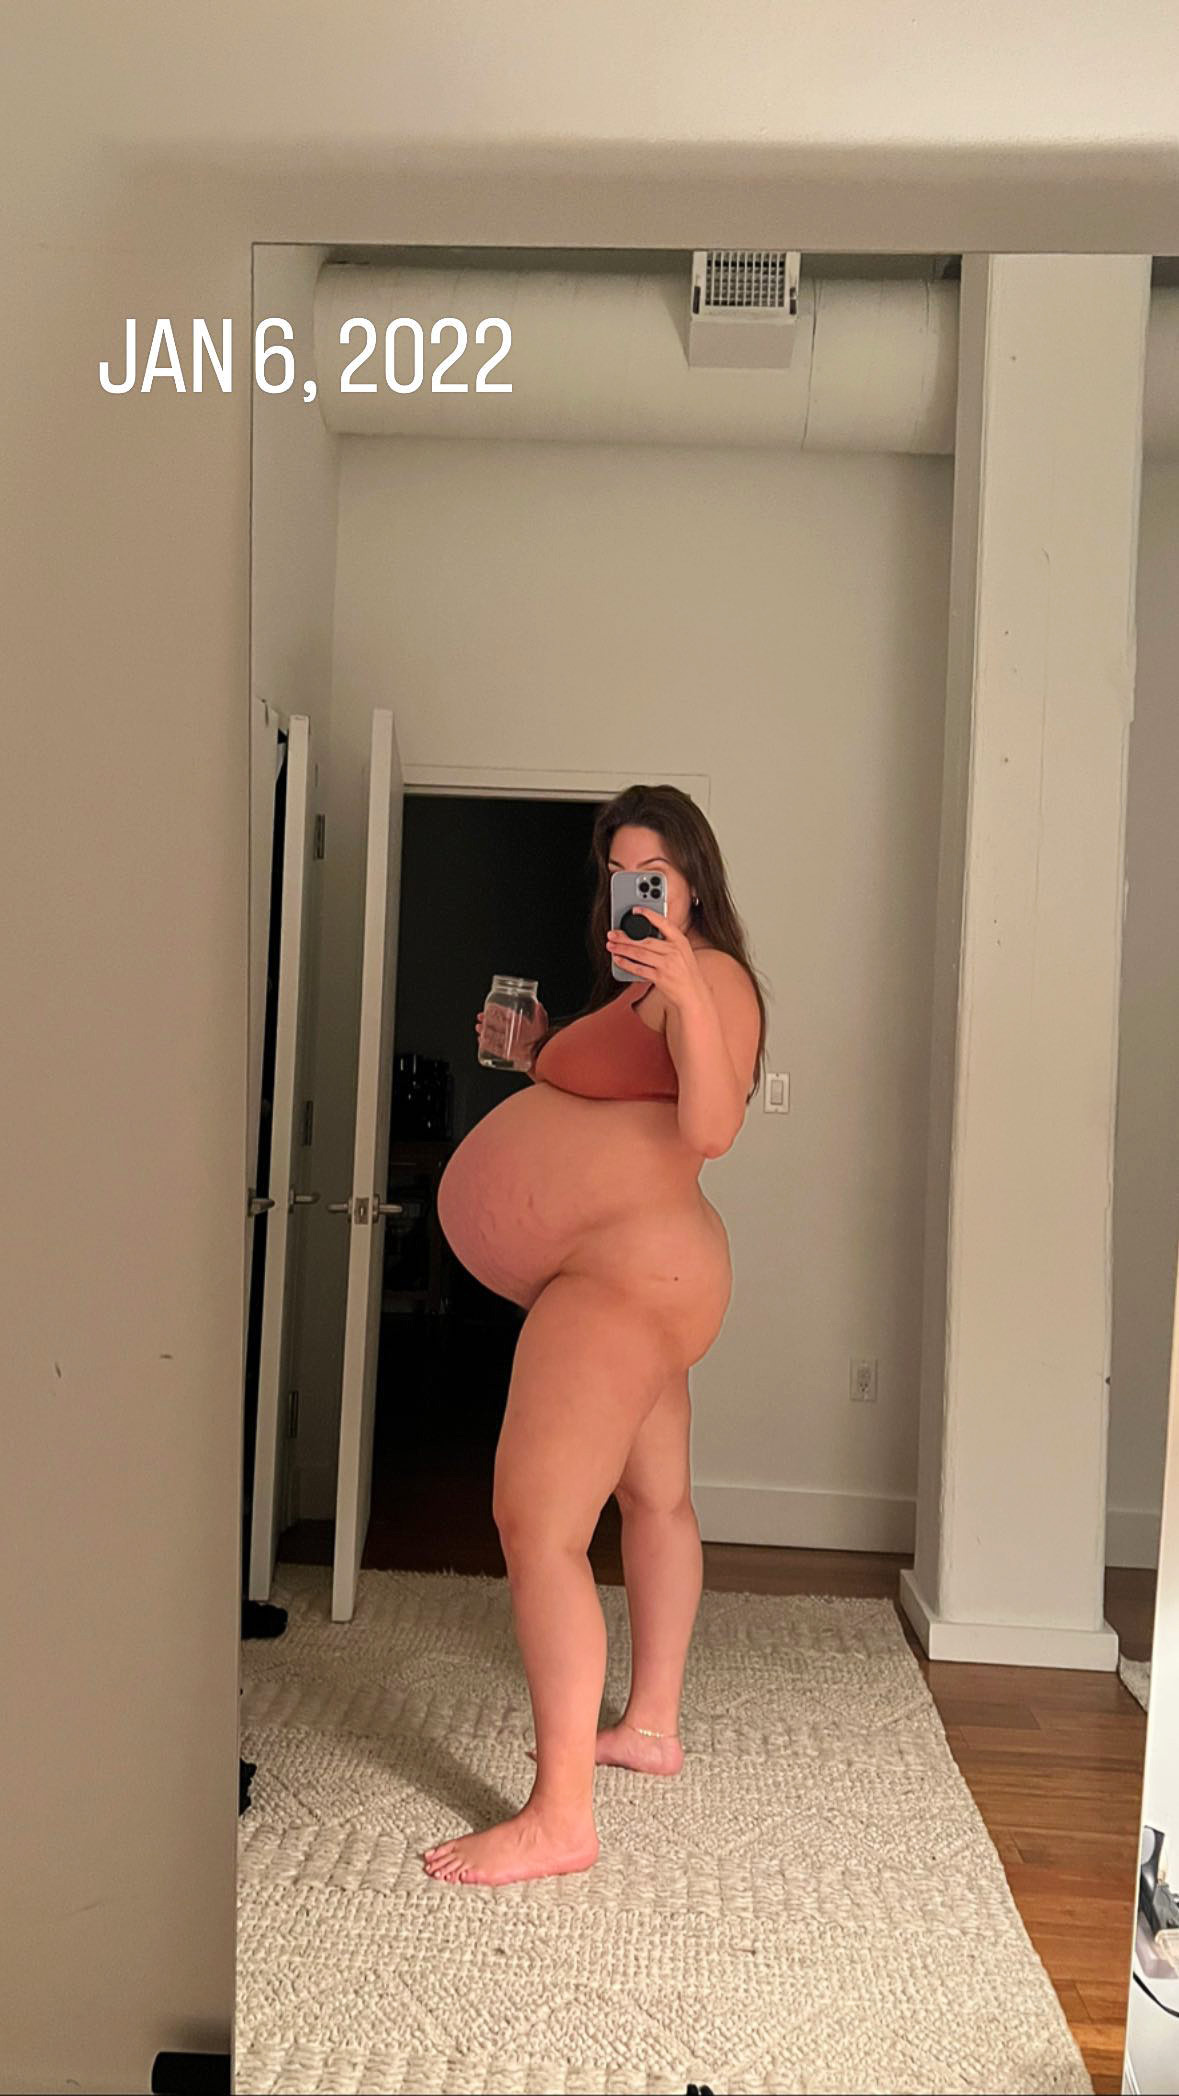 9 Months Pregnant Nude Gallery - Ashley Graham Shares Nude Pics From When She Was Pregnant With Twins